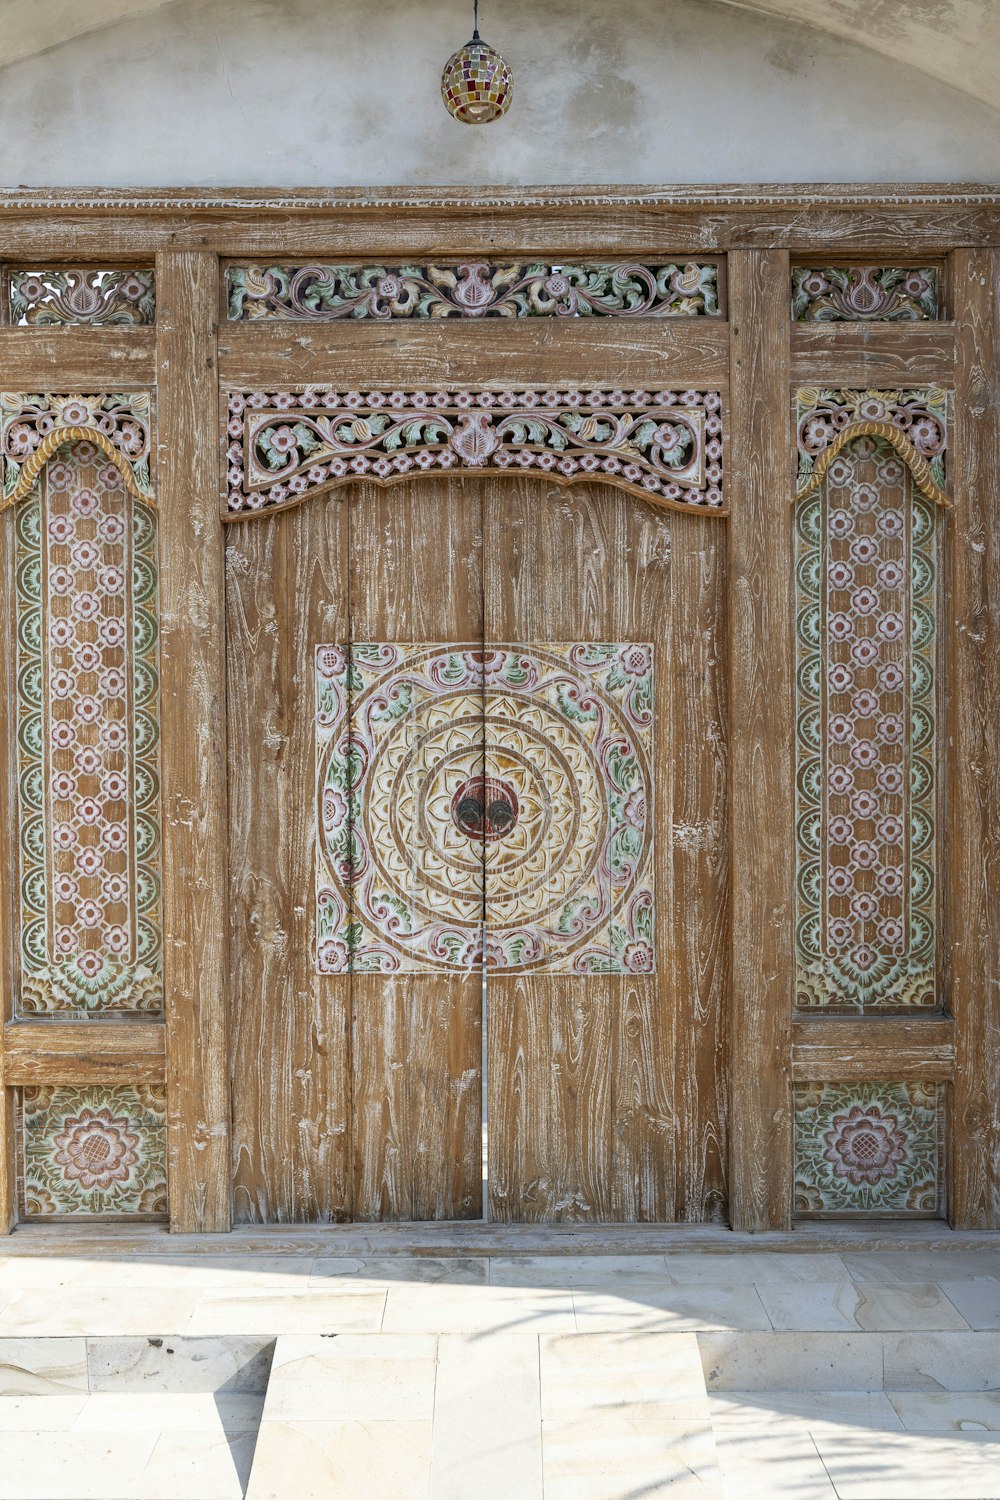 a large wooden door with intricate designs on it